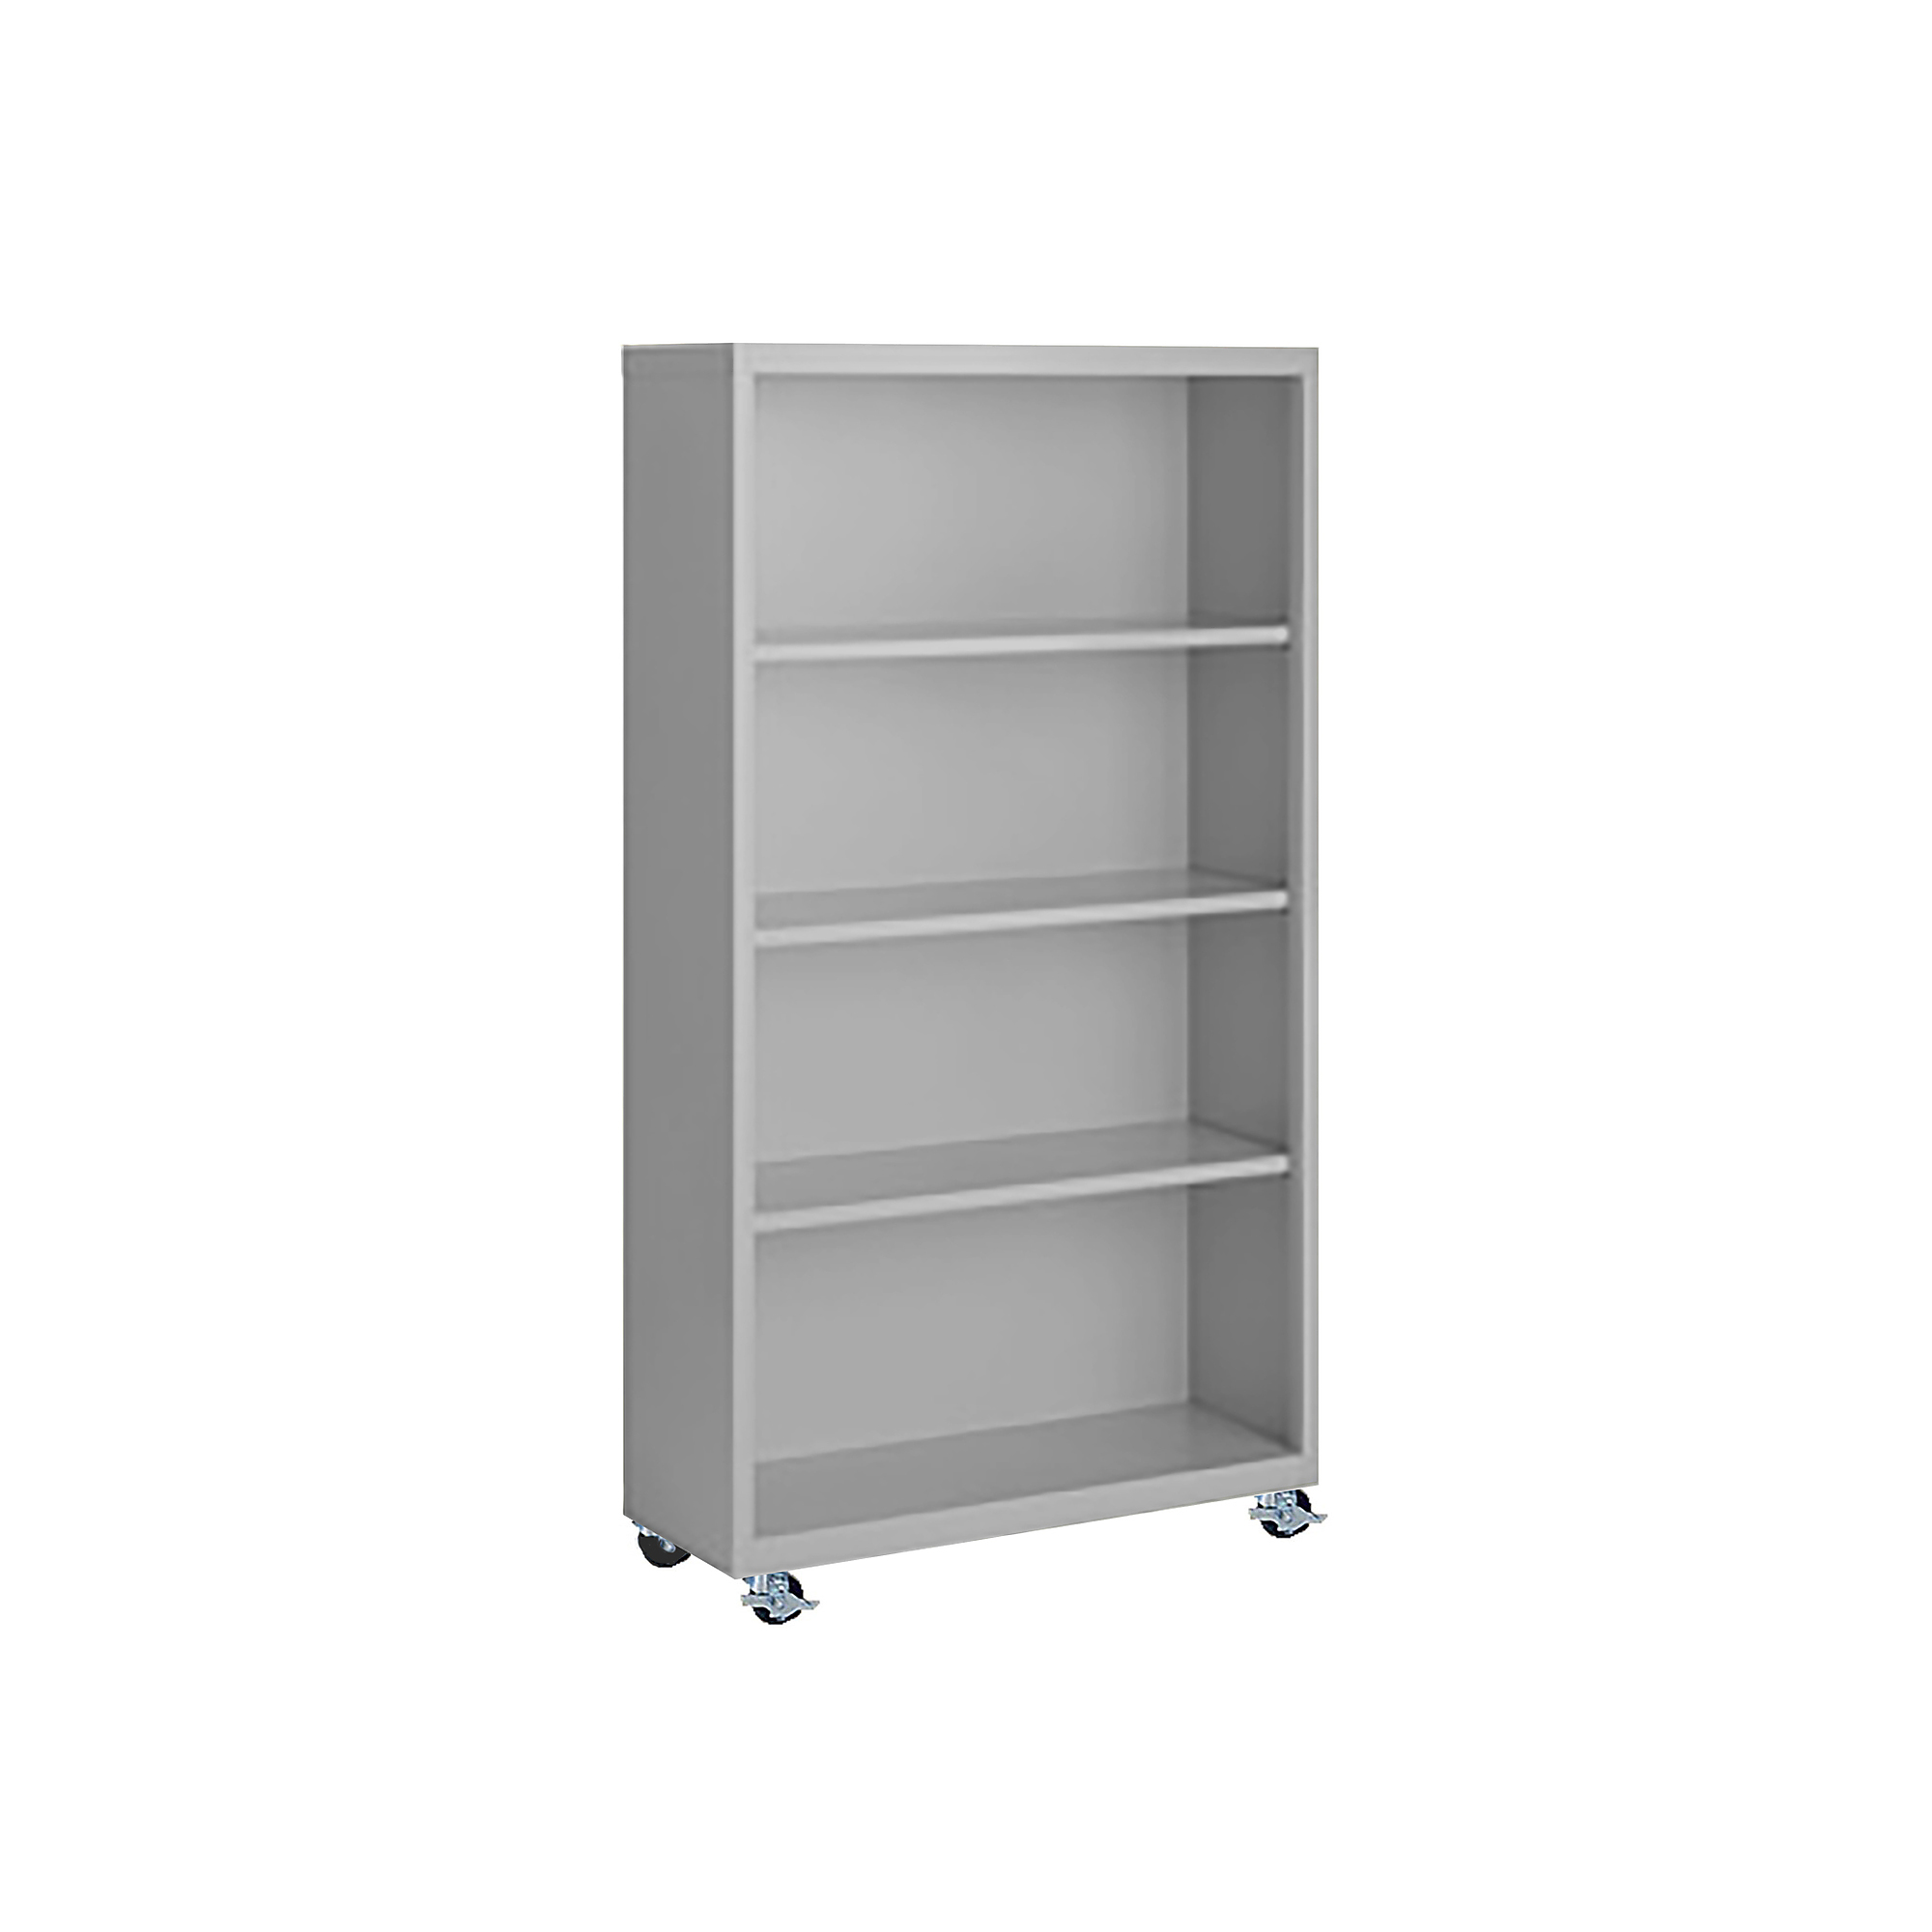 Steel Cabinets USA, 36Inchx18Inchx55Inch Gray Mobile Bookcase Fully Assembled, Height 55 in, Shelves (qty.) 4, Material Steel, Model MBCA-365518-G